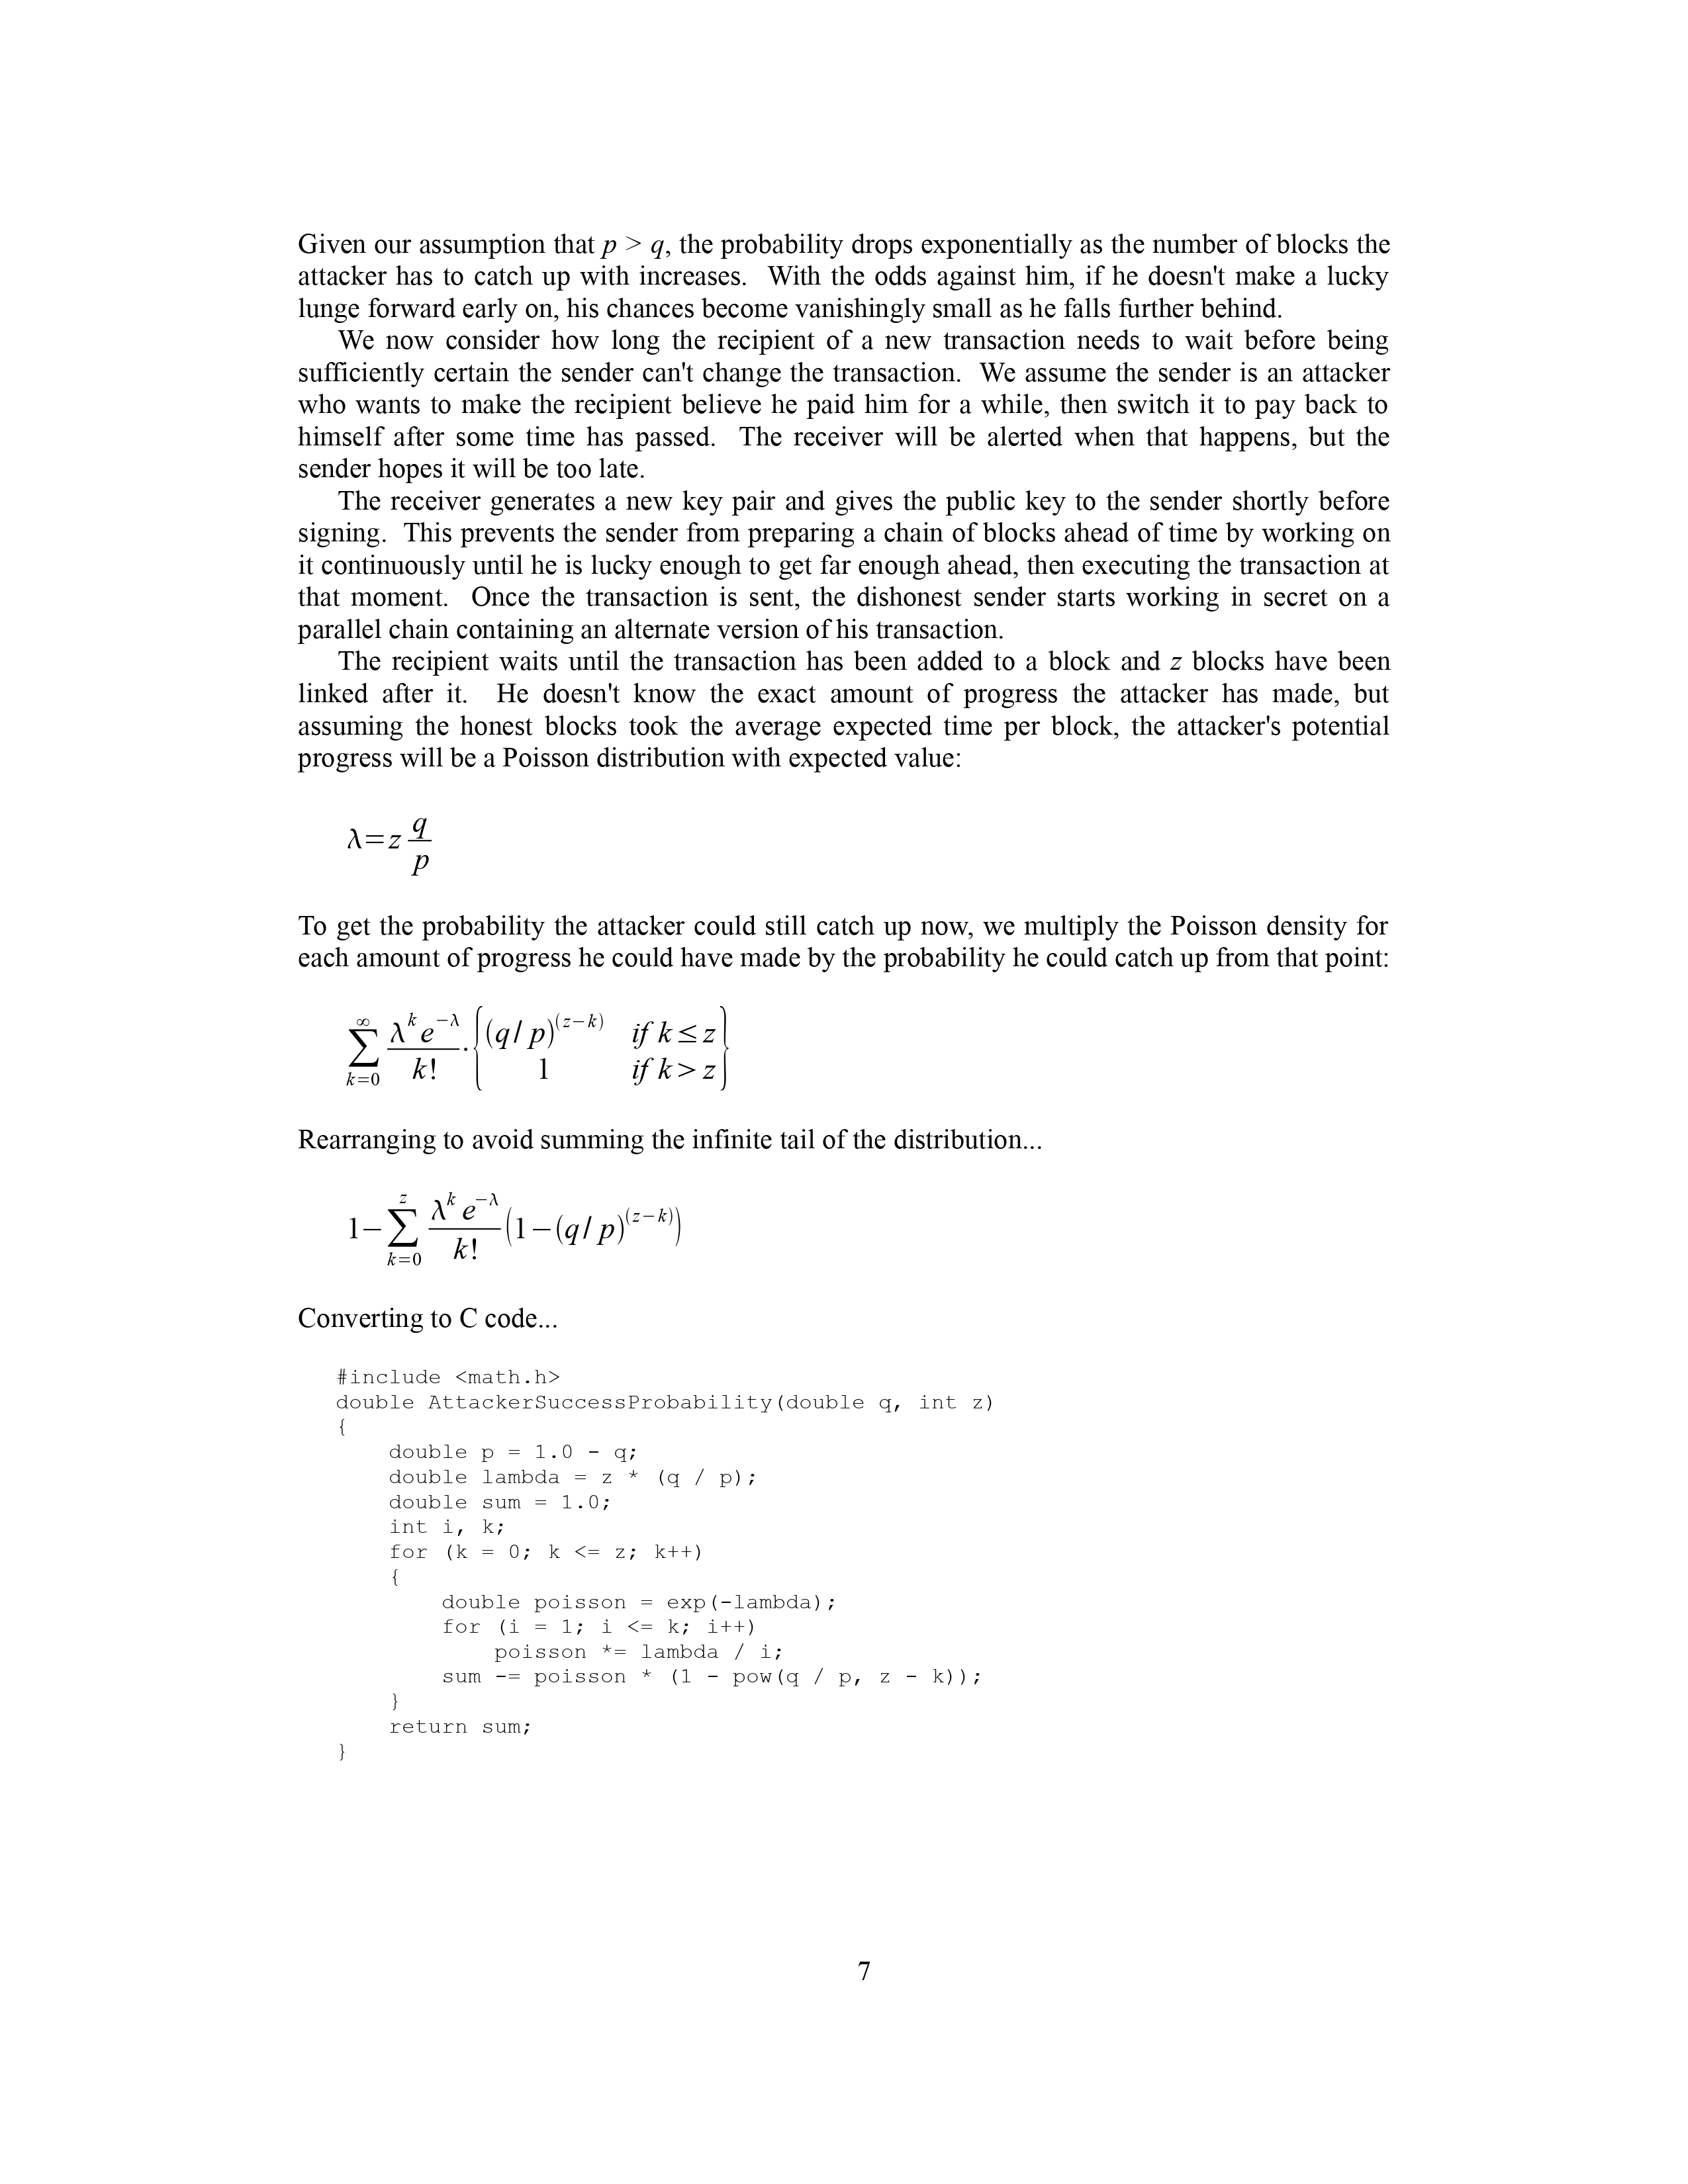 Bitcoin Whitepaper Page 7